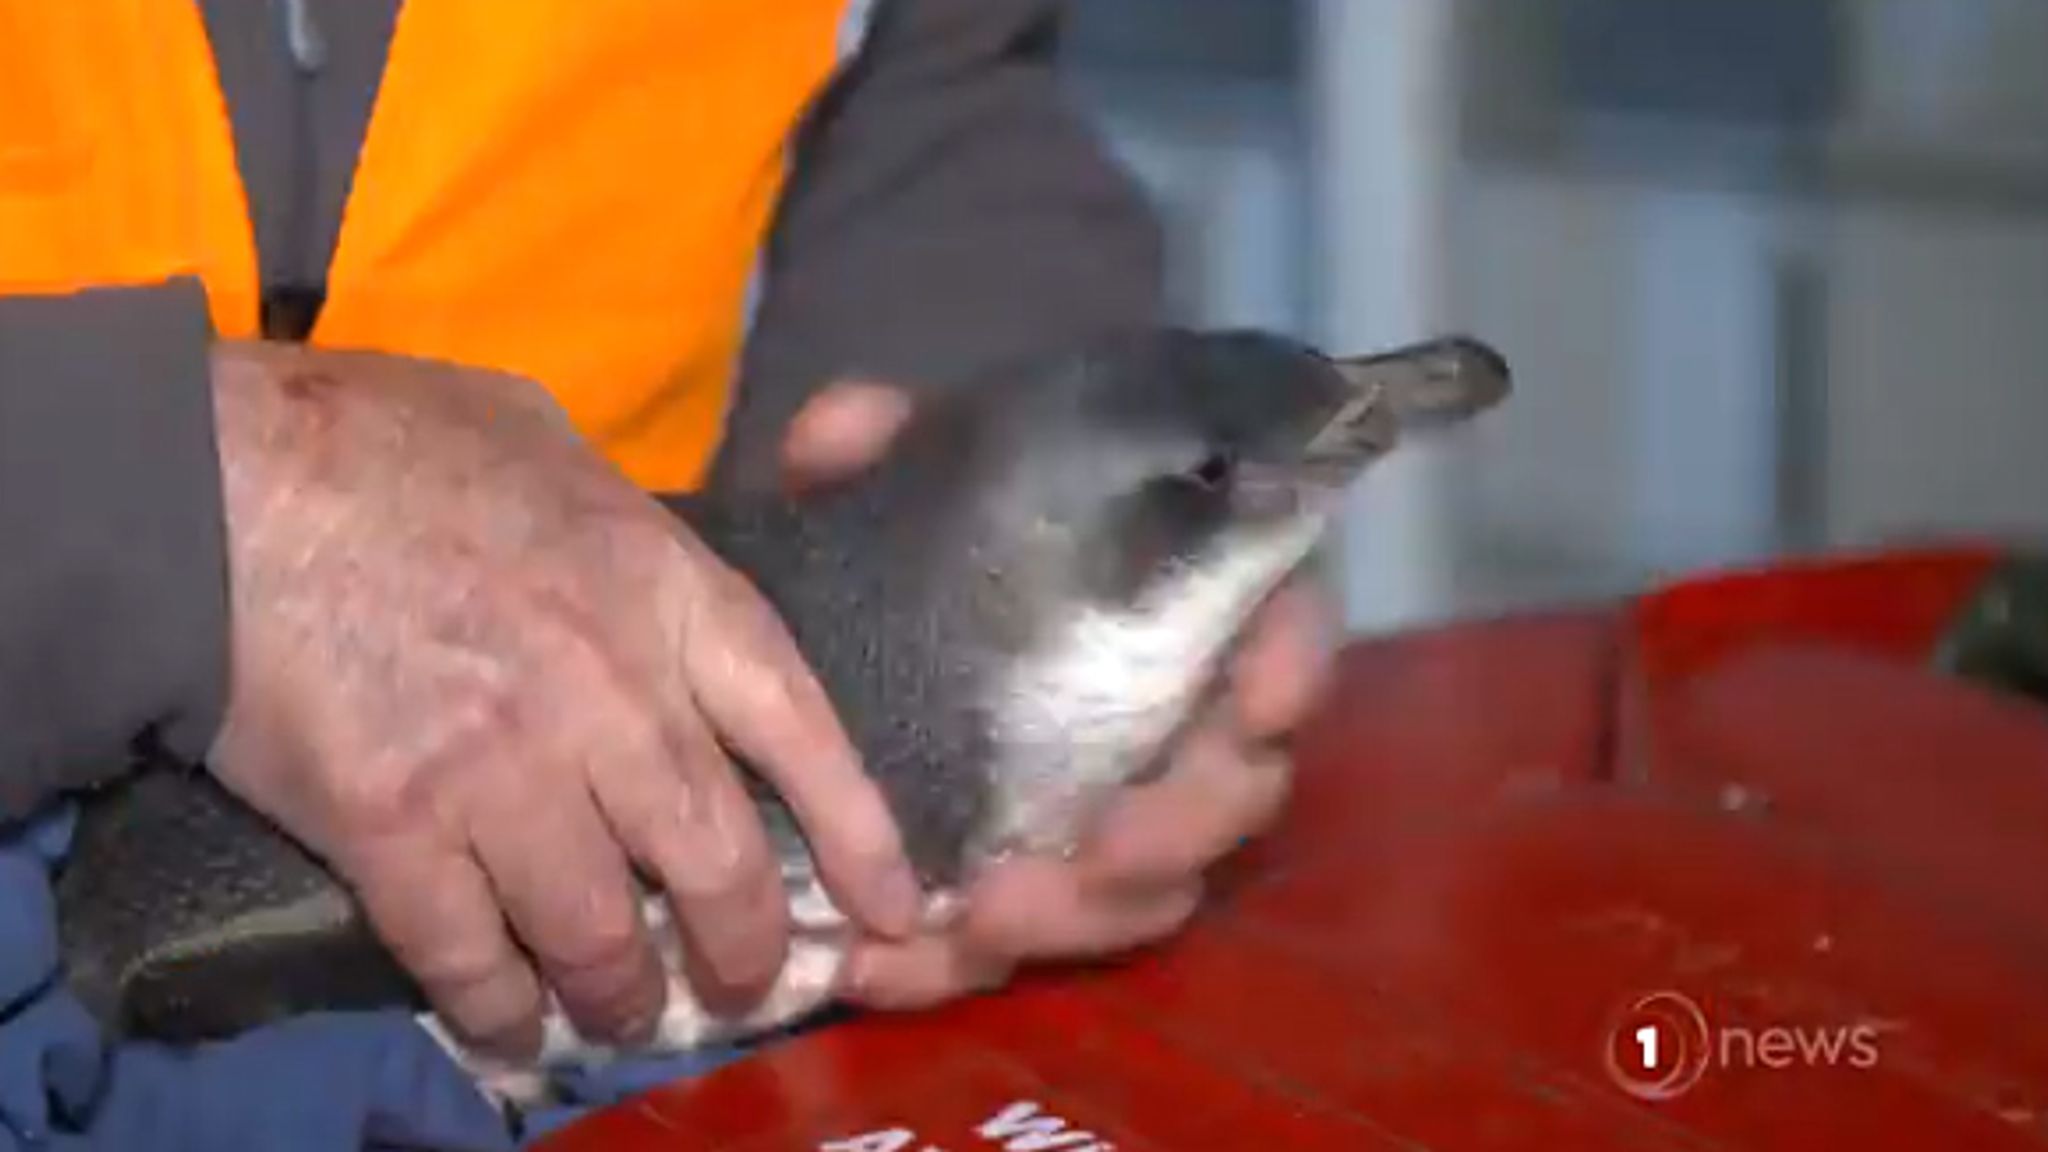 Fishy customers: Police remove two nesting penguins from New Zealand ...